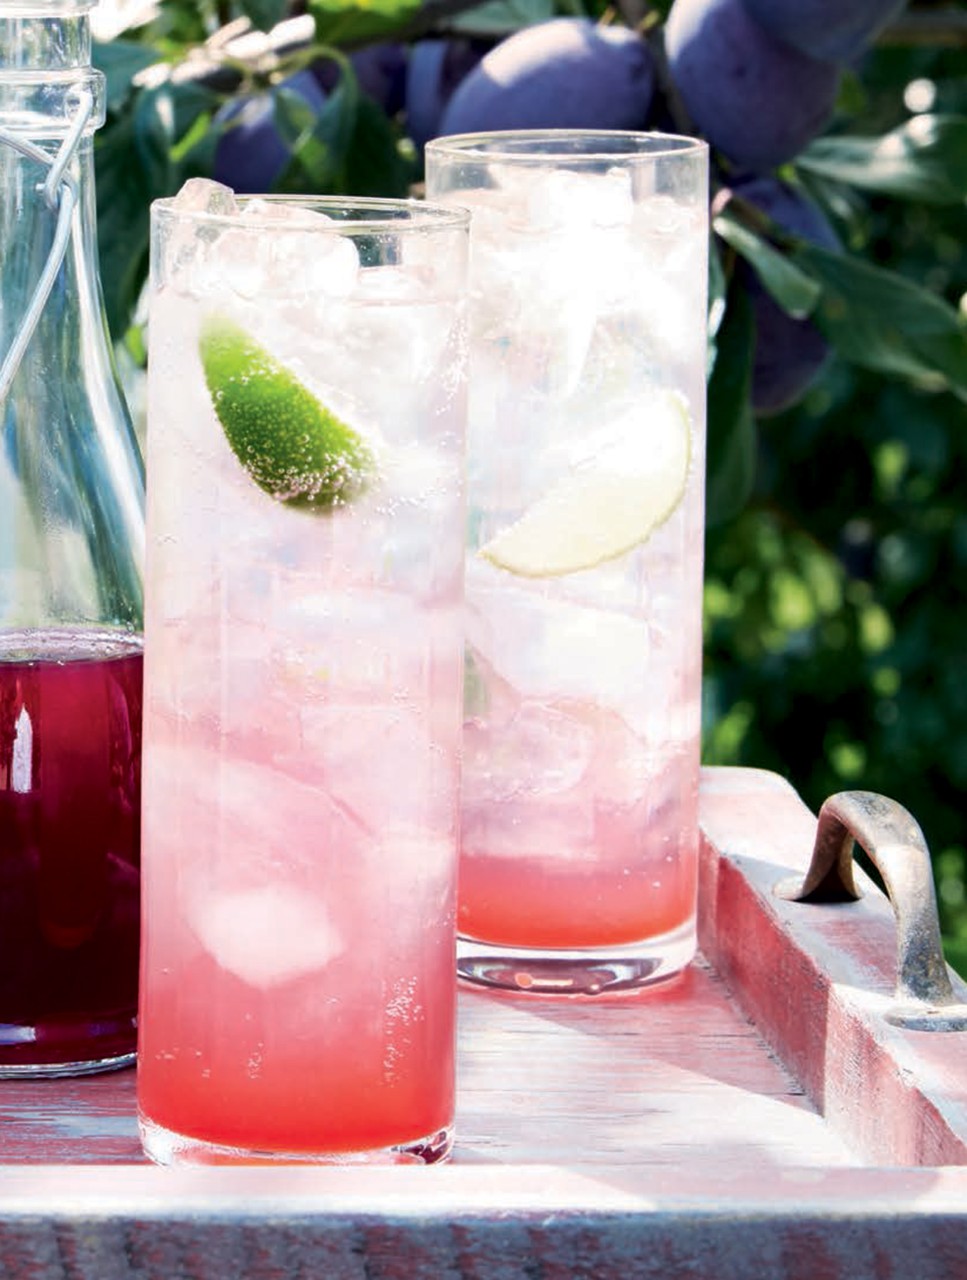 Spicy Plum Ginger Ale